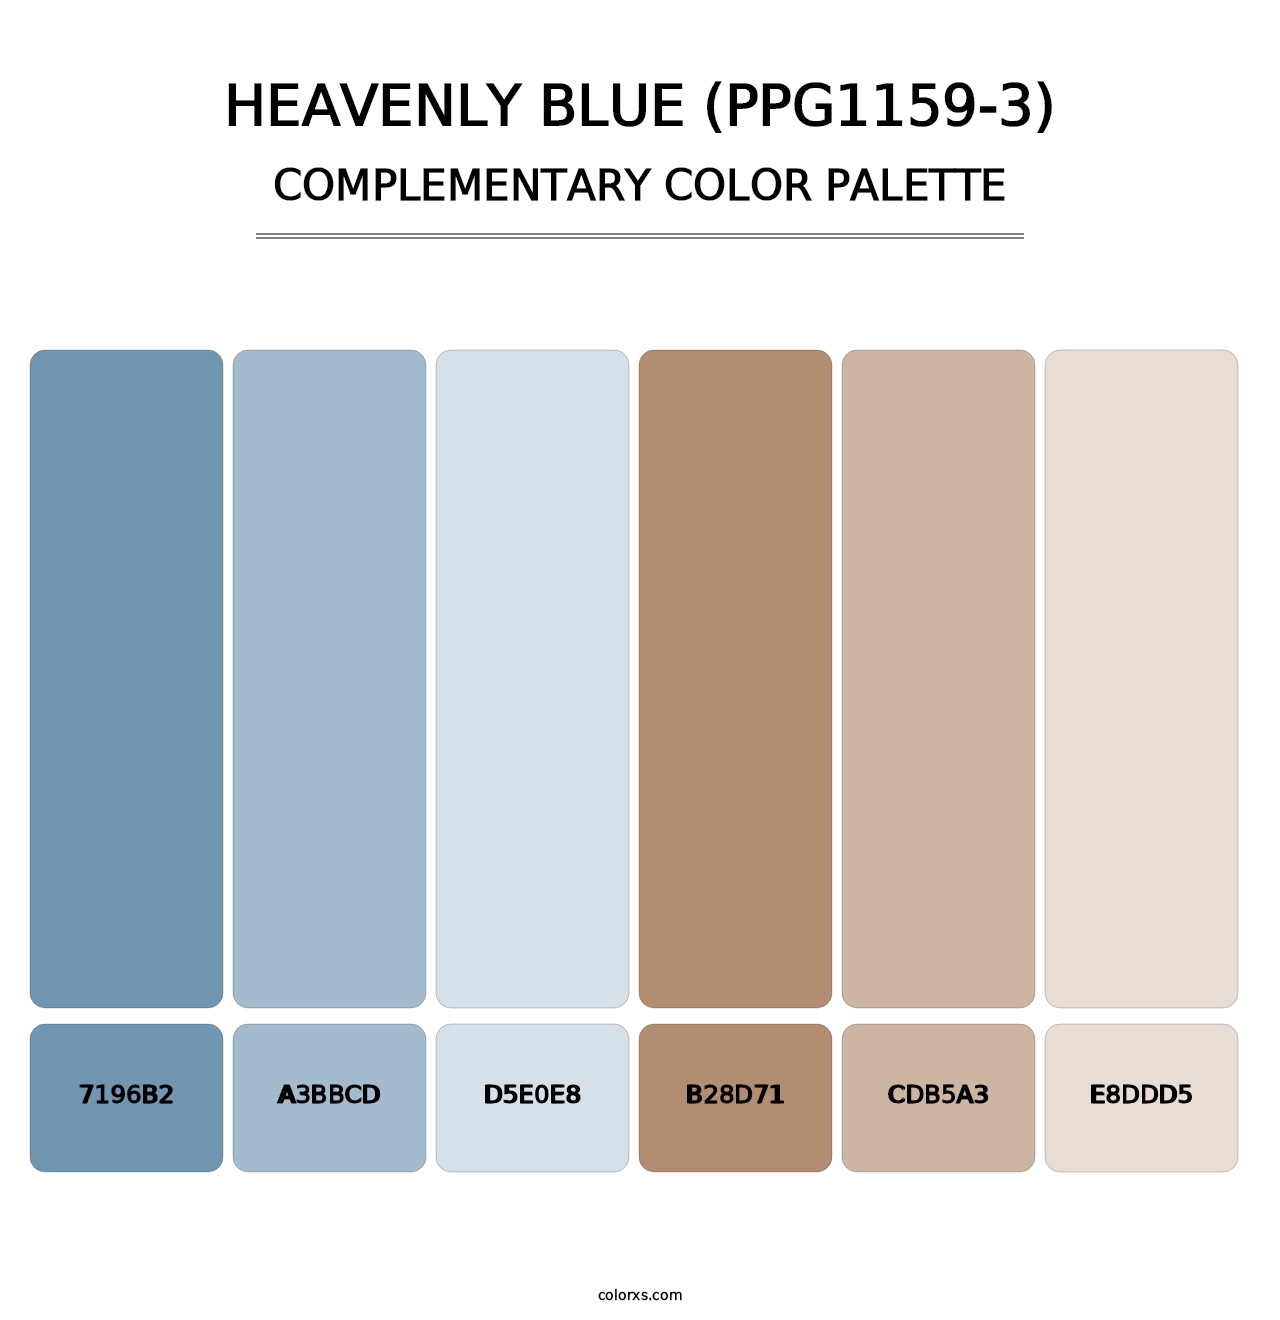 Heavenly Blue (PPG1159-3) - Complementary Color Palette